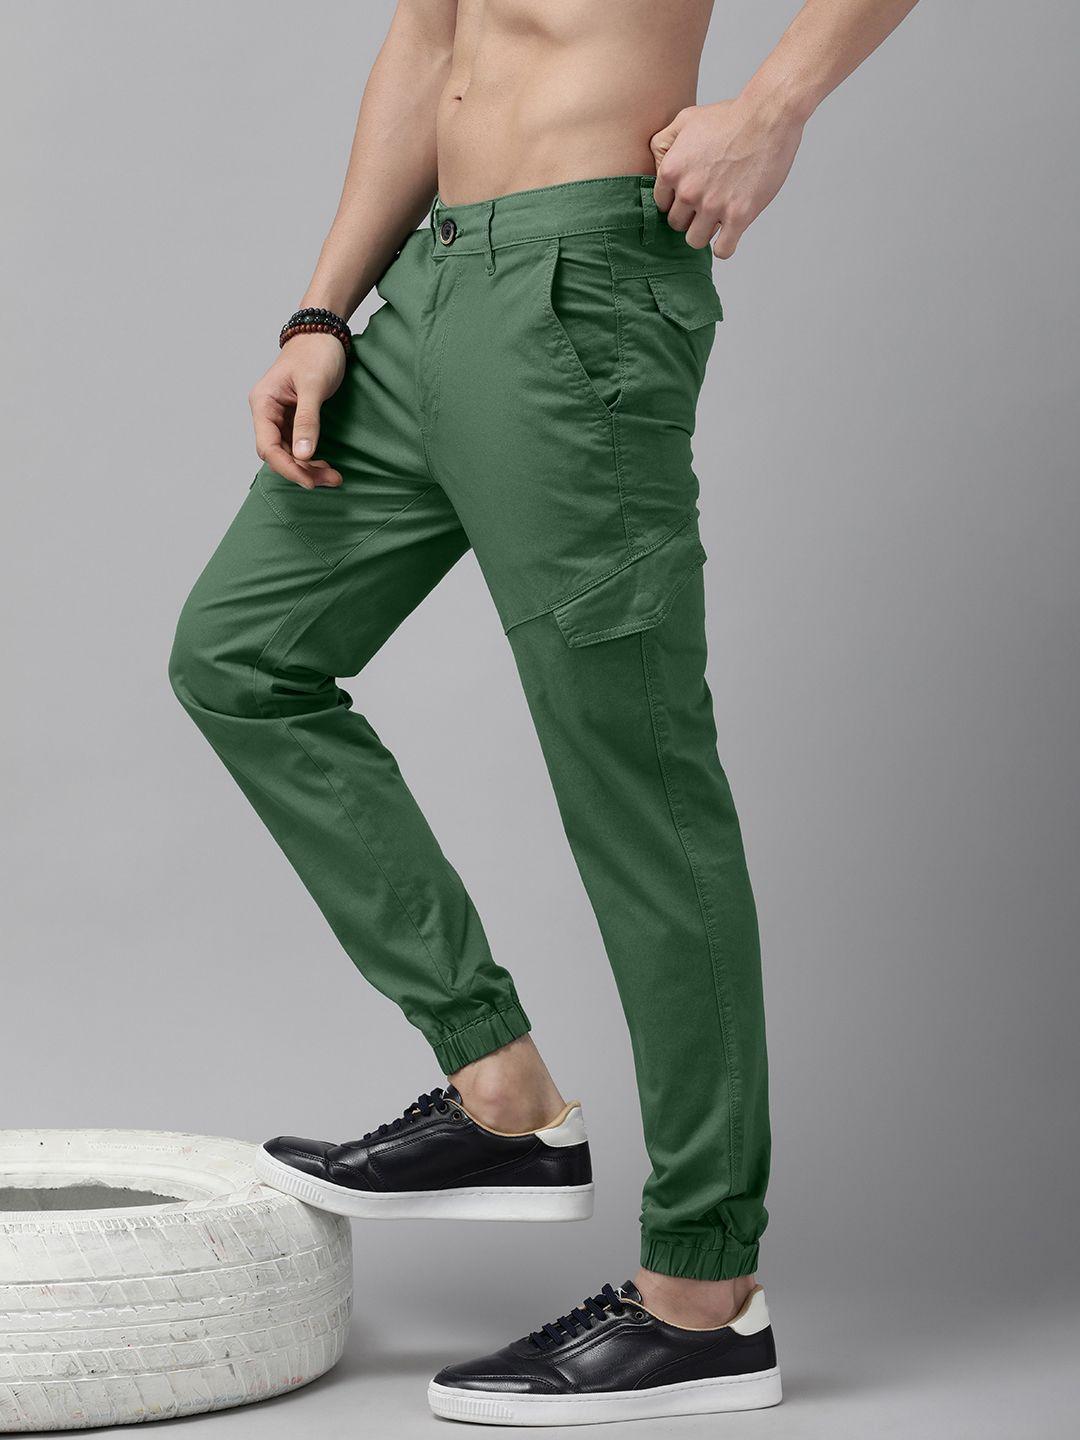 the-roadster-lifestyle-co-men-green-solid-mid-rise-regular-fit-joggers-trousers